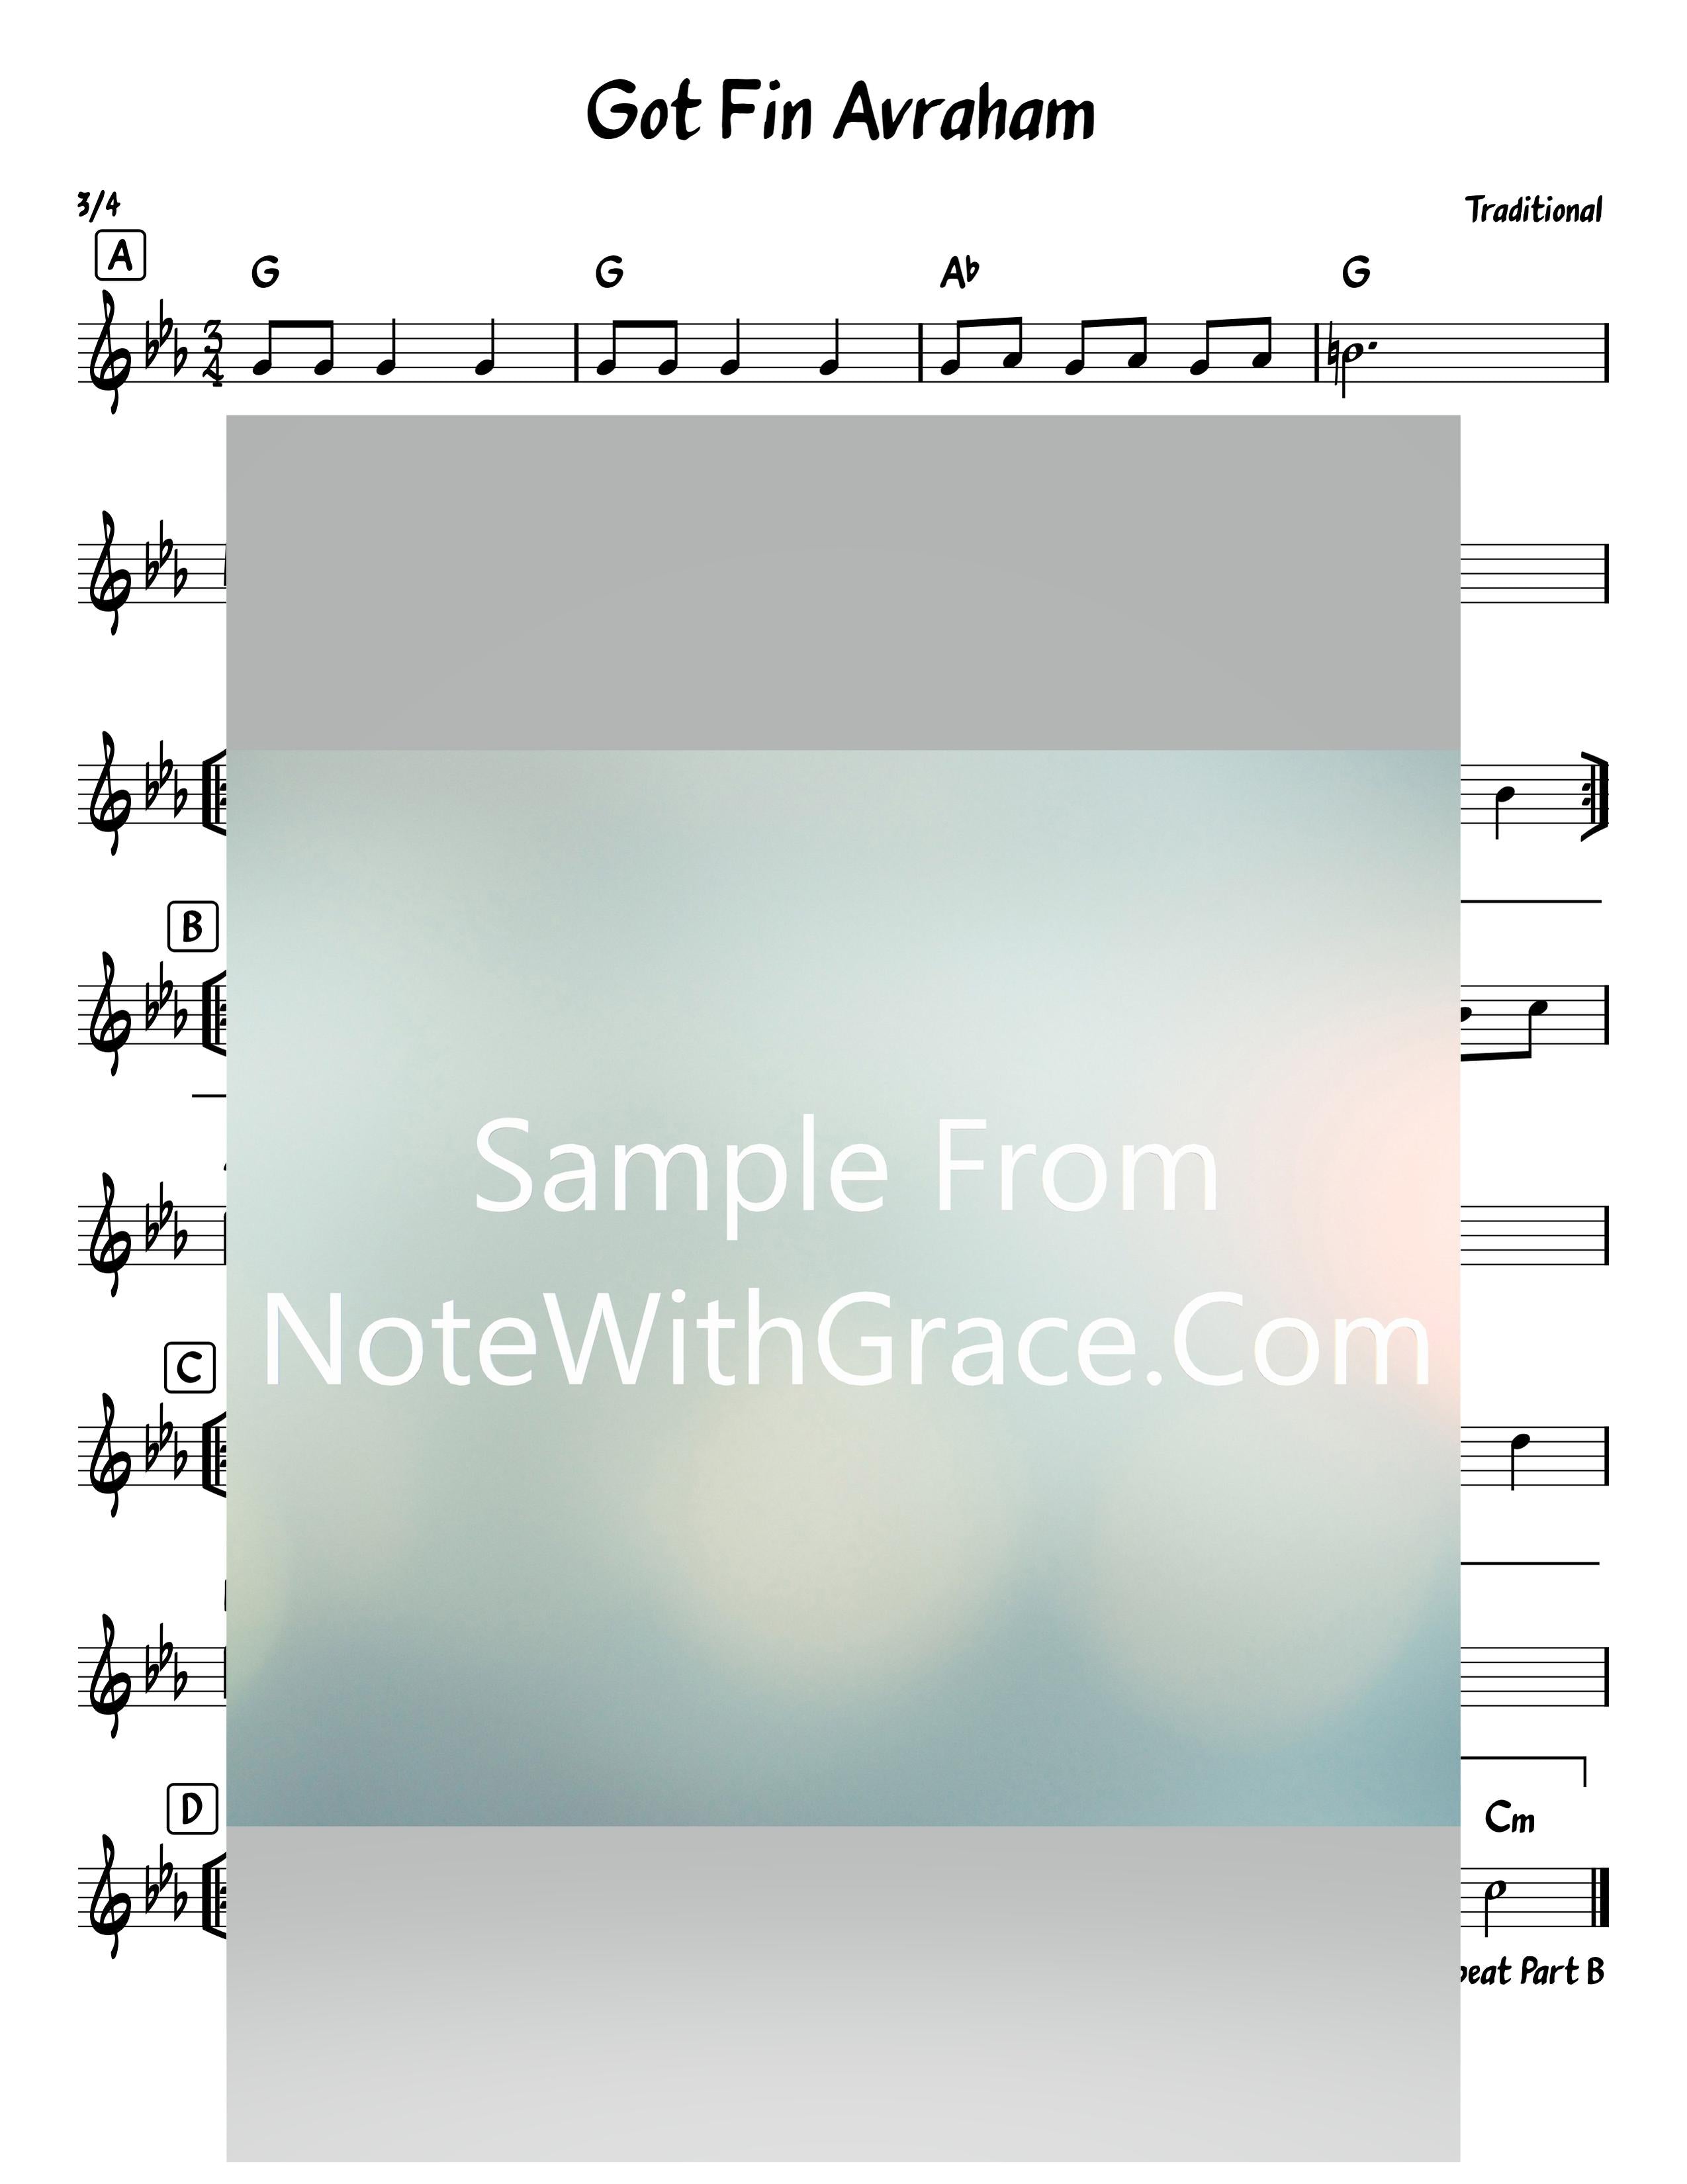 Got Fin Avaraham - גאט פון אברהם Lead Sheet (Traditional)-Sheet music-NoteWithGrace.com